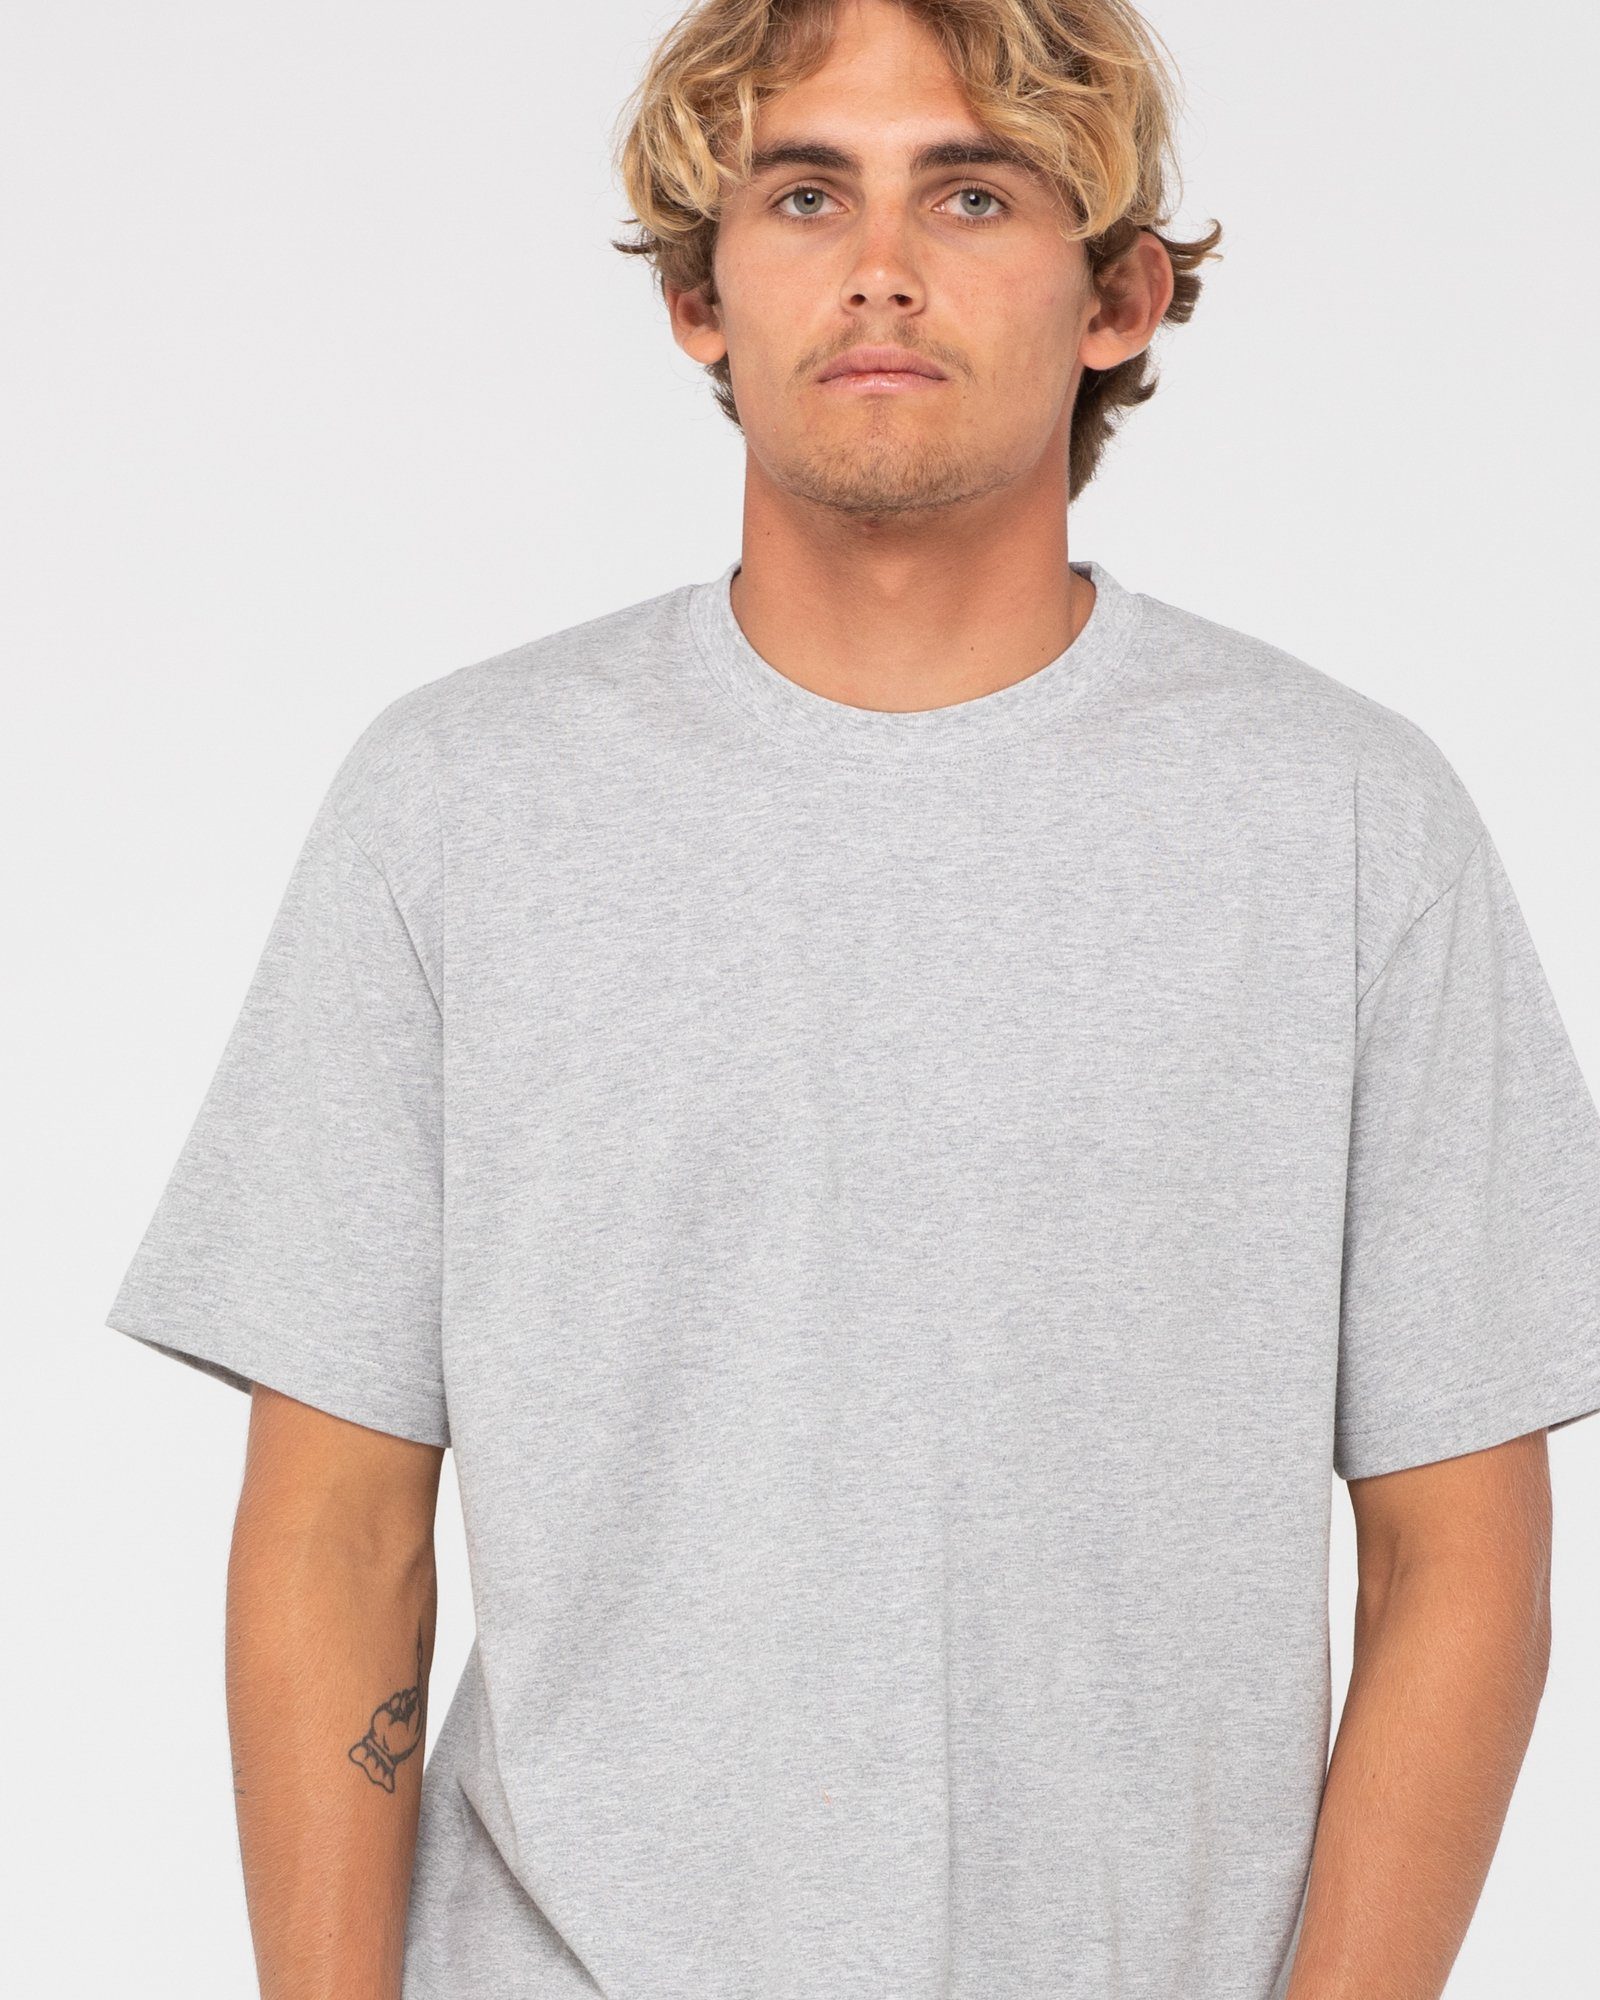 Grey Rusty DELUXE T-Shirt Marle TEE BLANK S/S